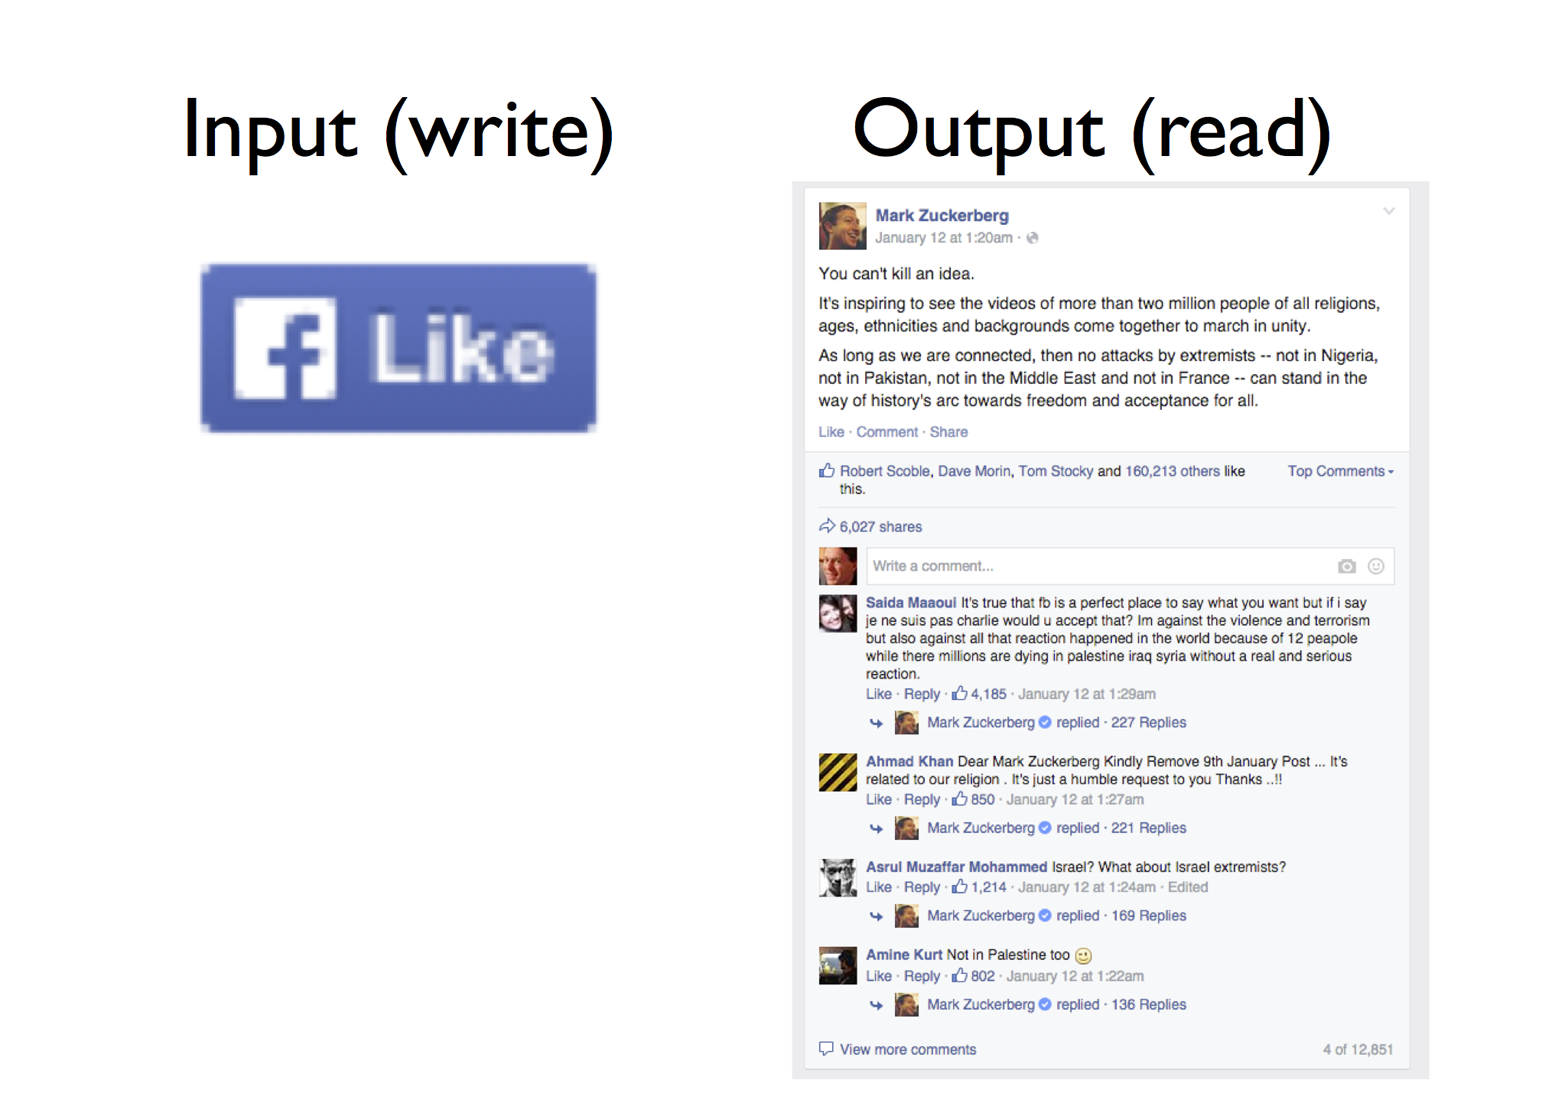 Facebook’s input: a “like” button. Facebook’s output: a timeline post, liked by lots of people.